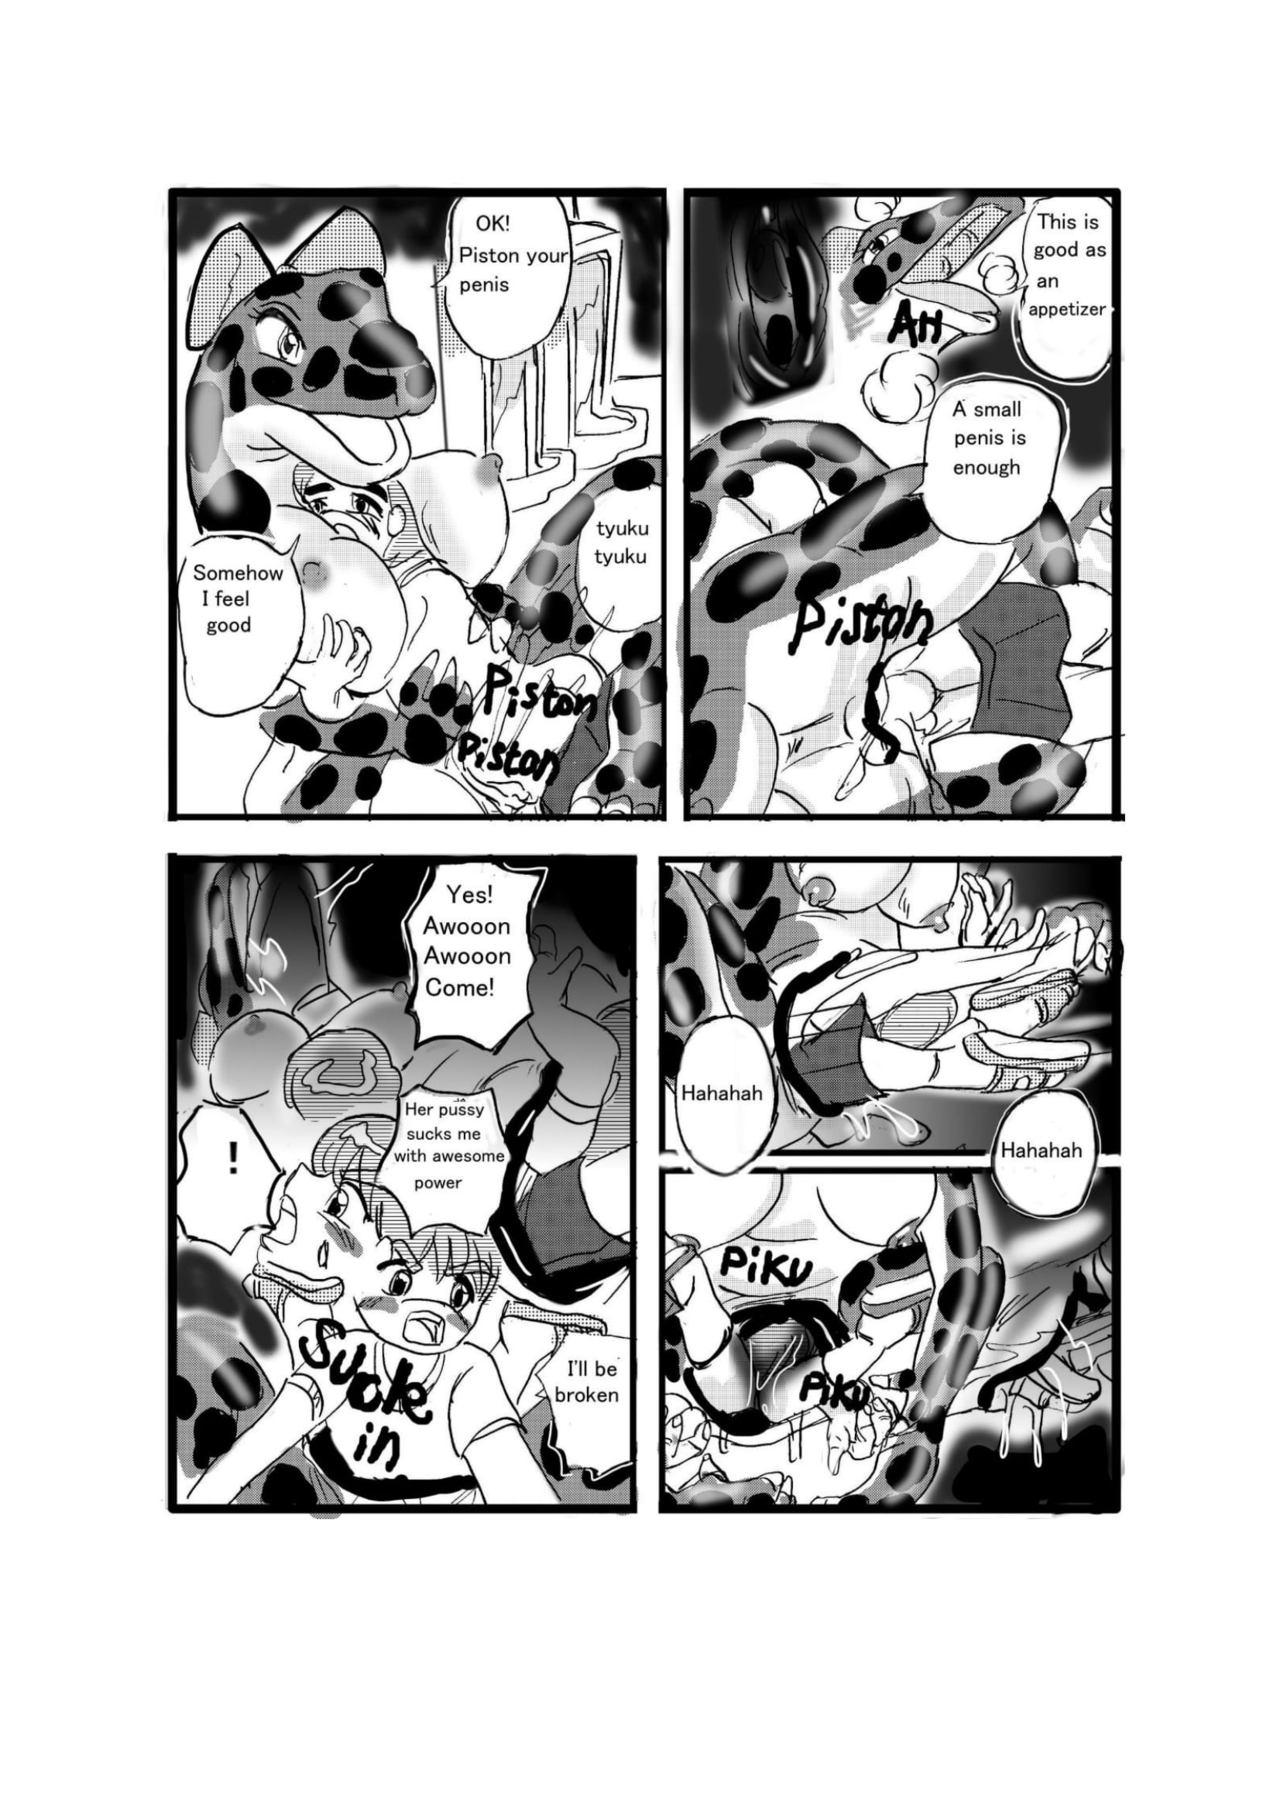 Sucks Swallowed Whole vol.2 Waniko + What's Digestion? - Original Point Of View - Page 5